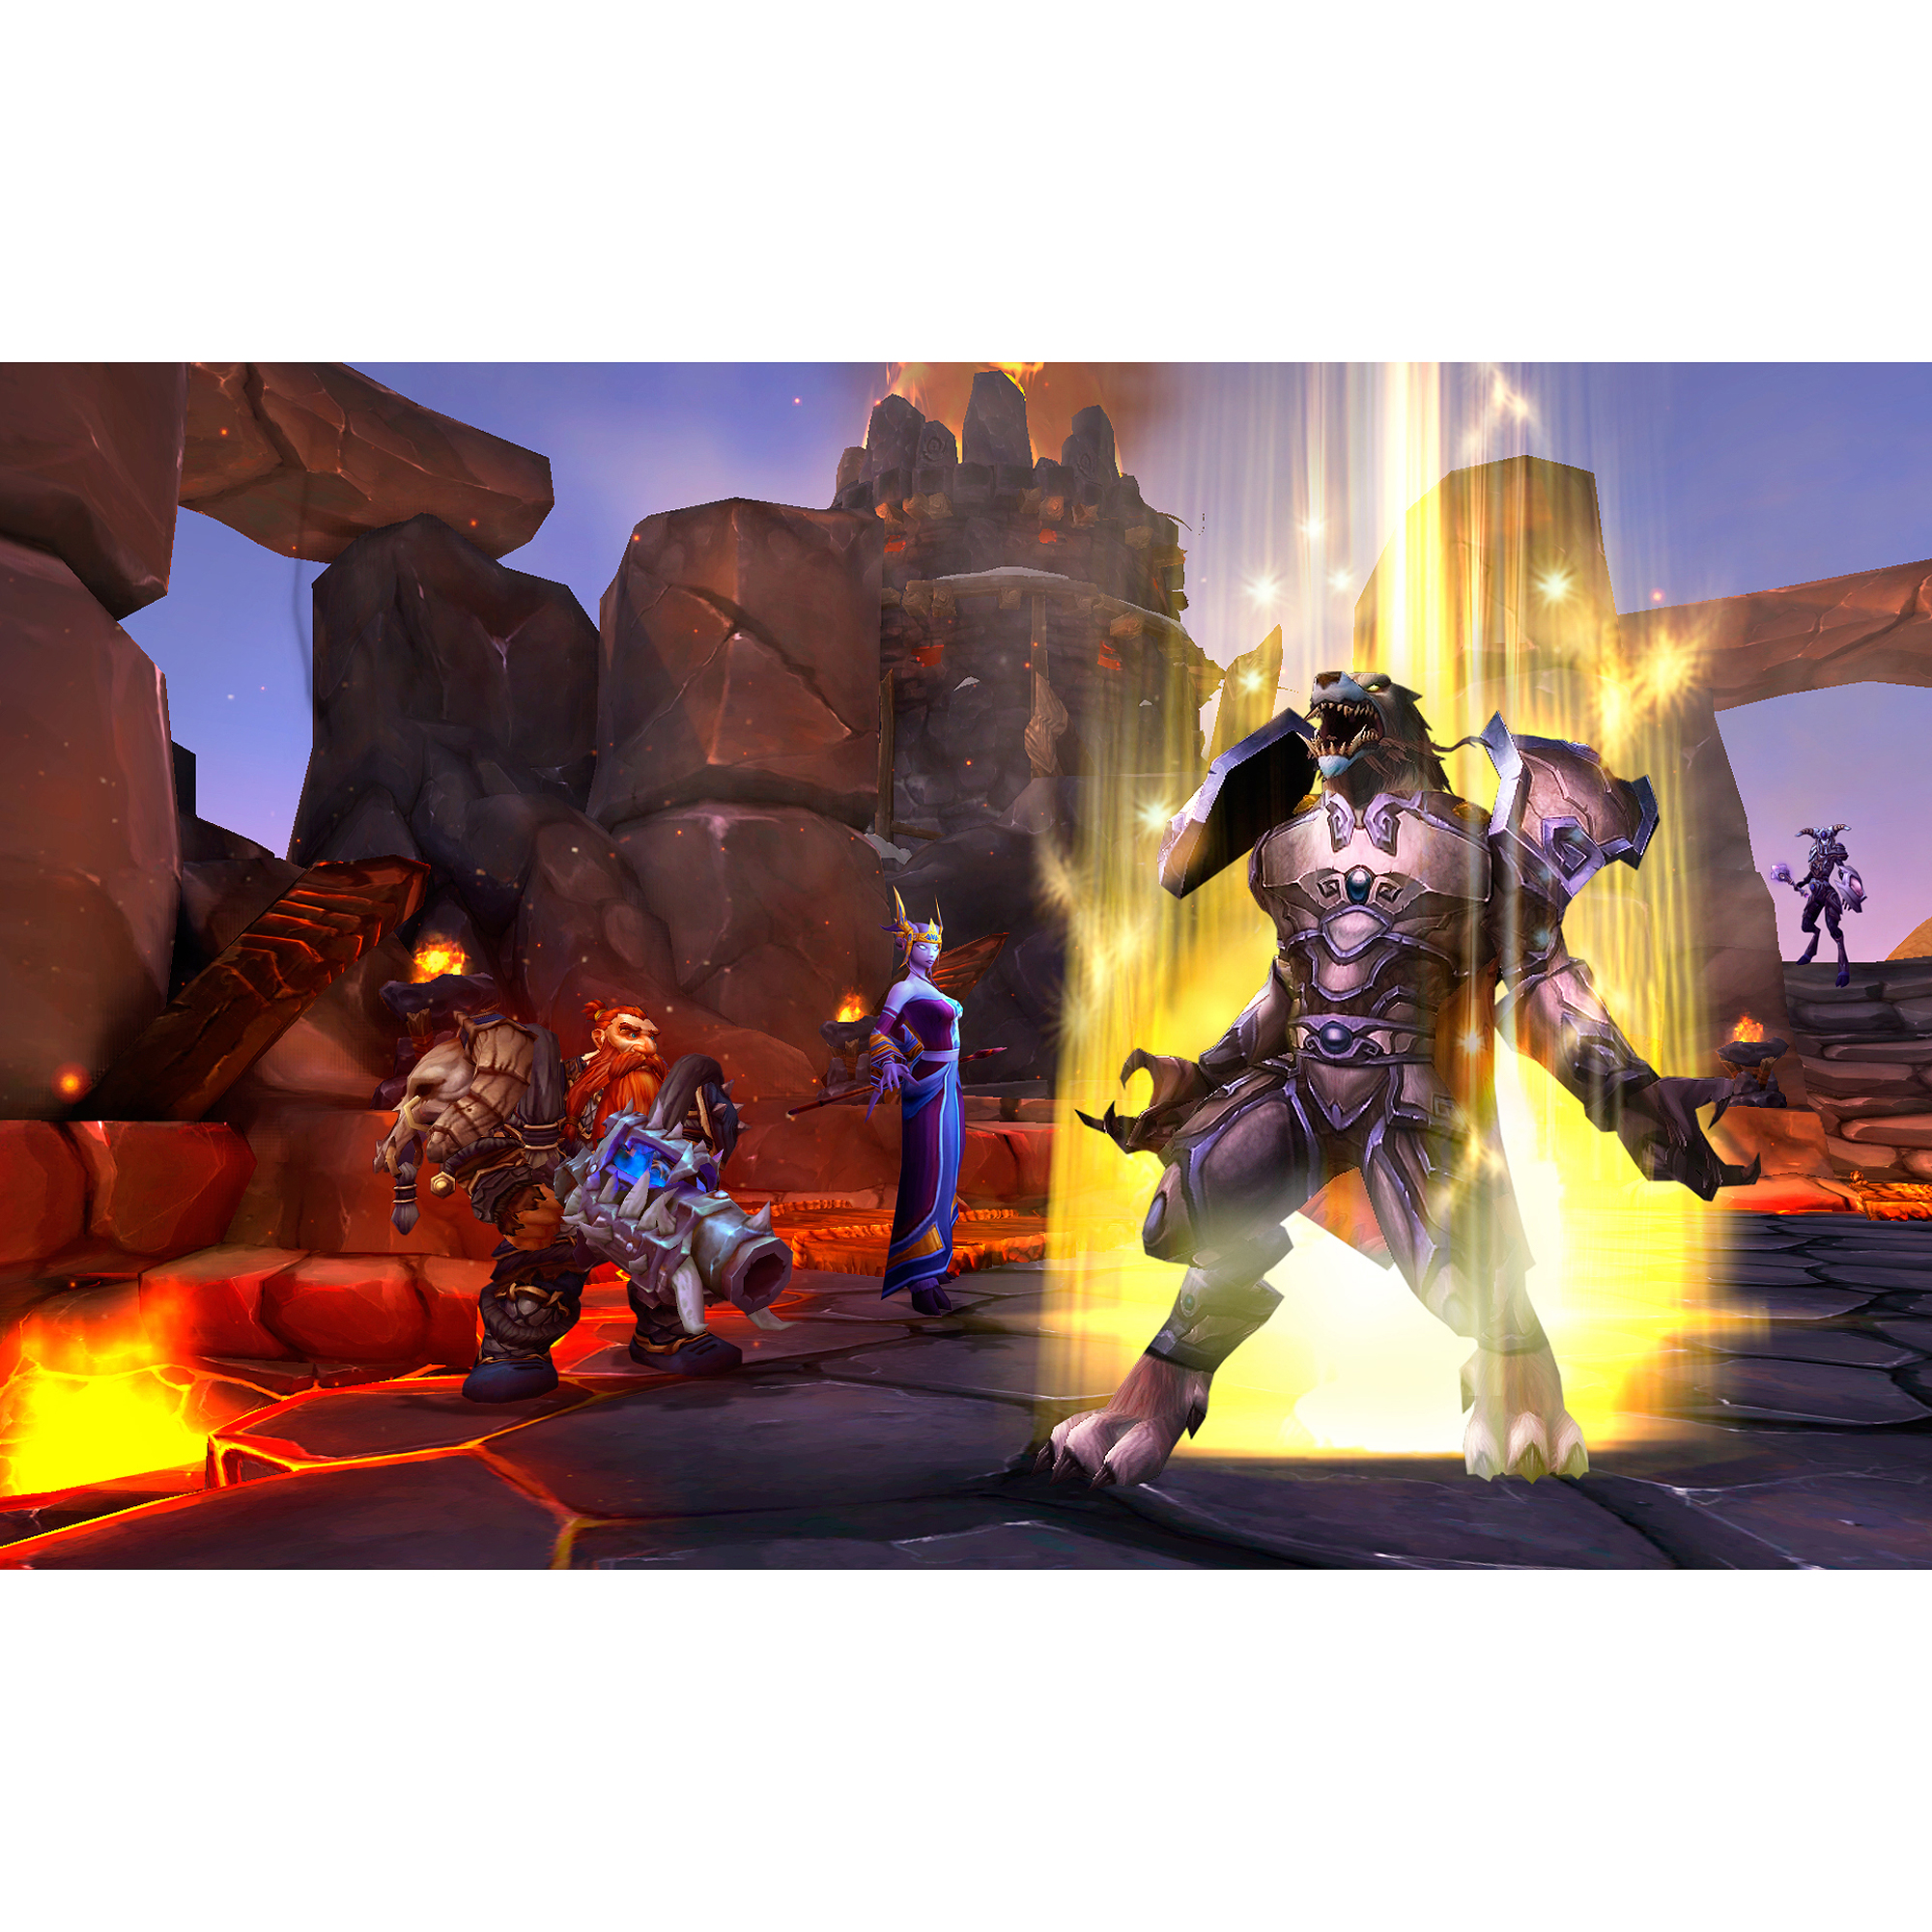 World of Warcraft Warlords of Draenor - Mac, Win - DVD - image 1 of 9